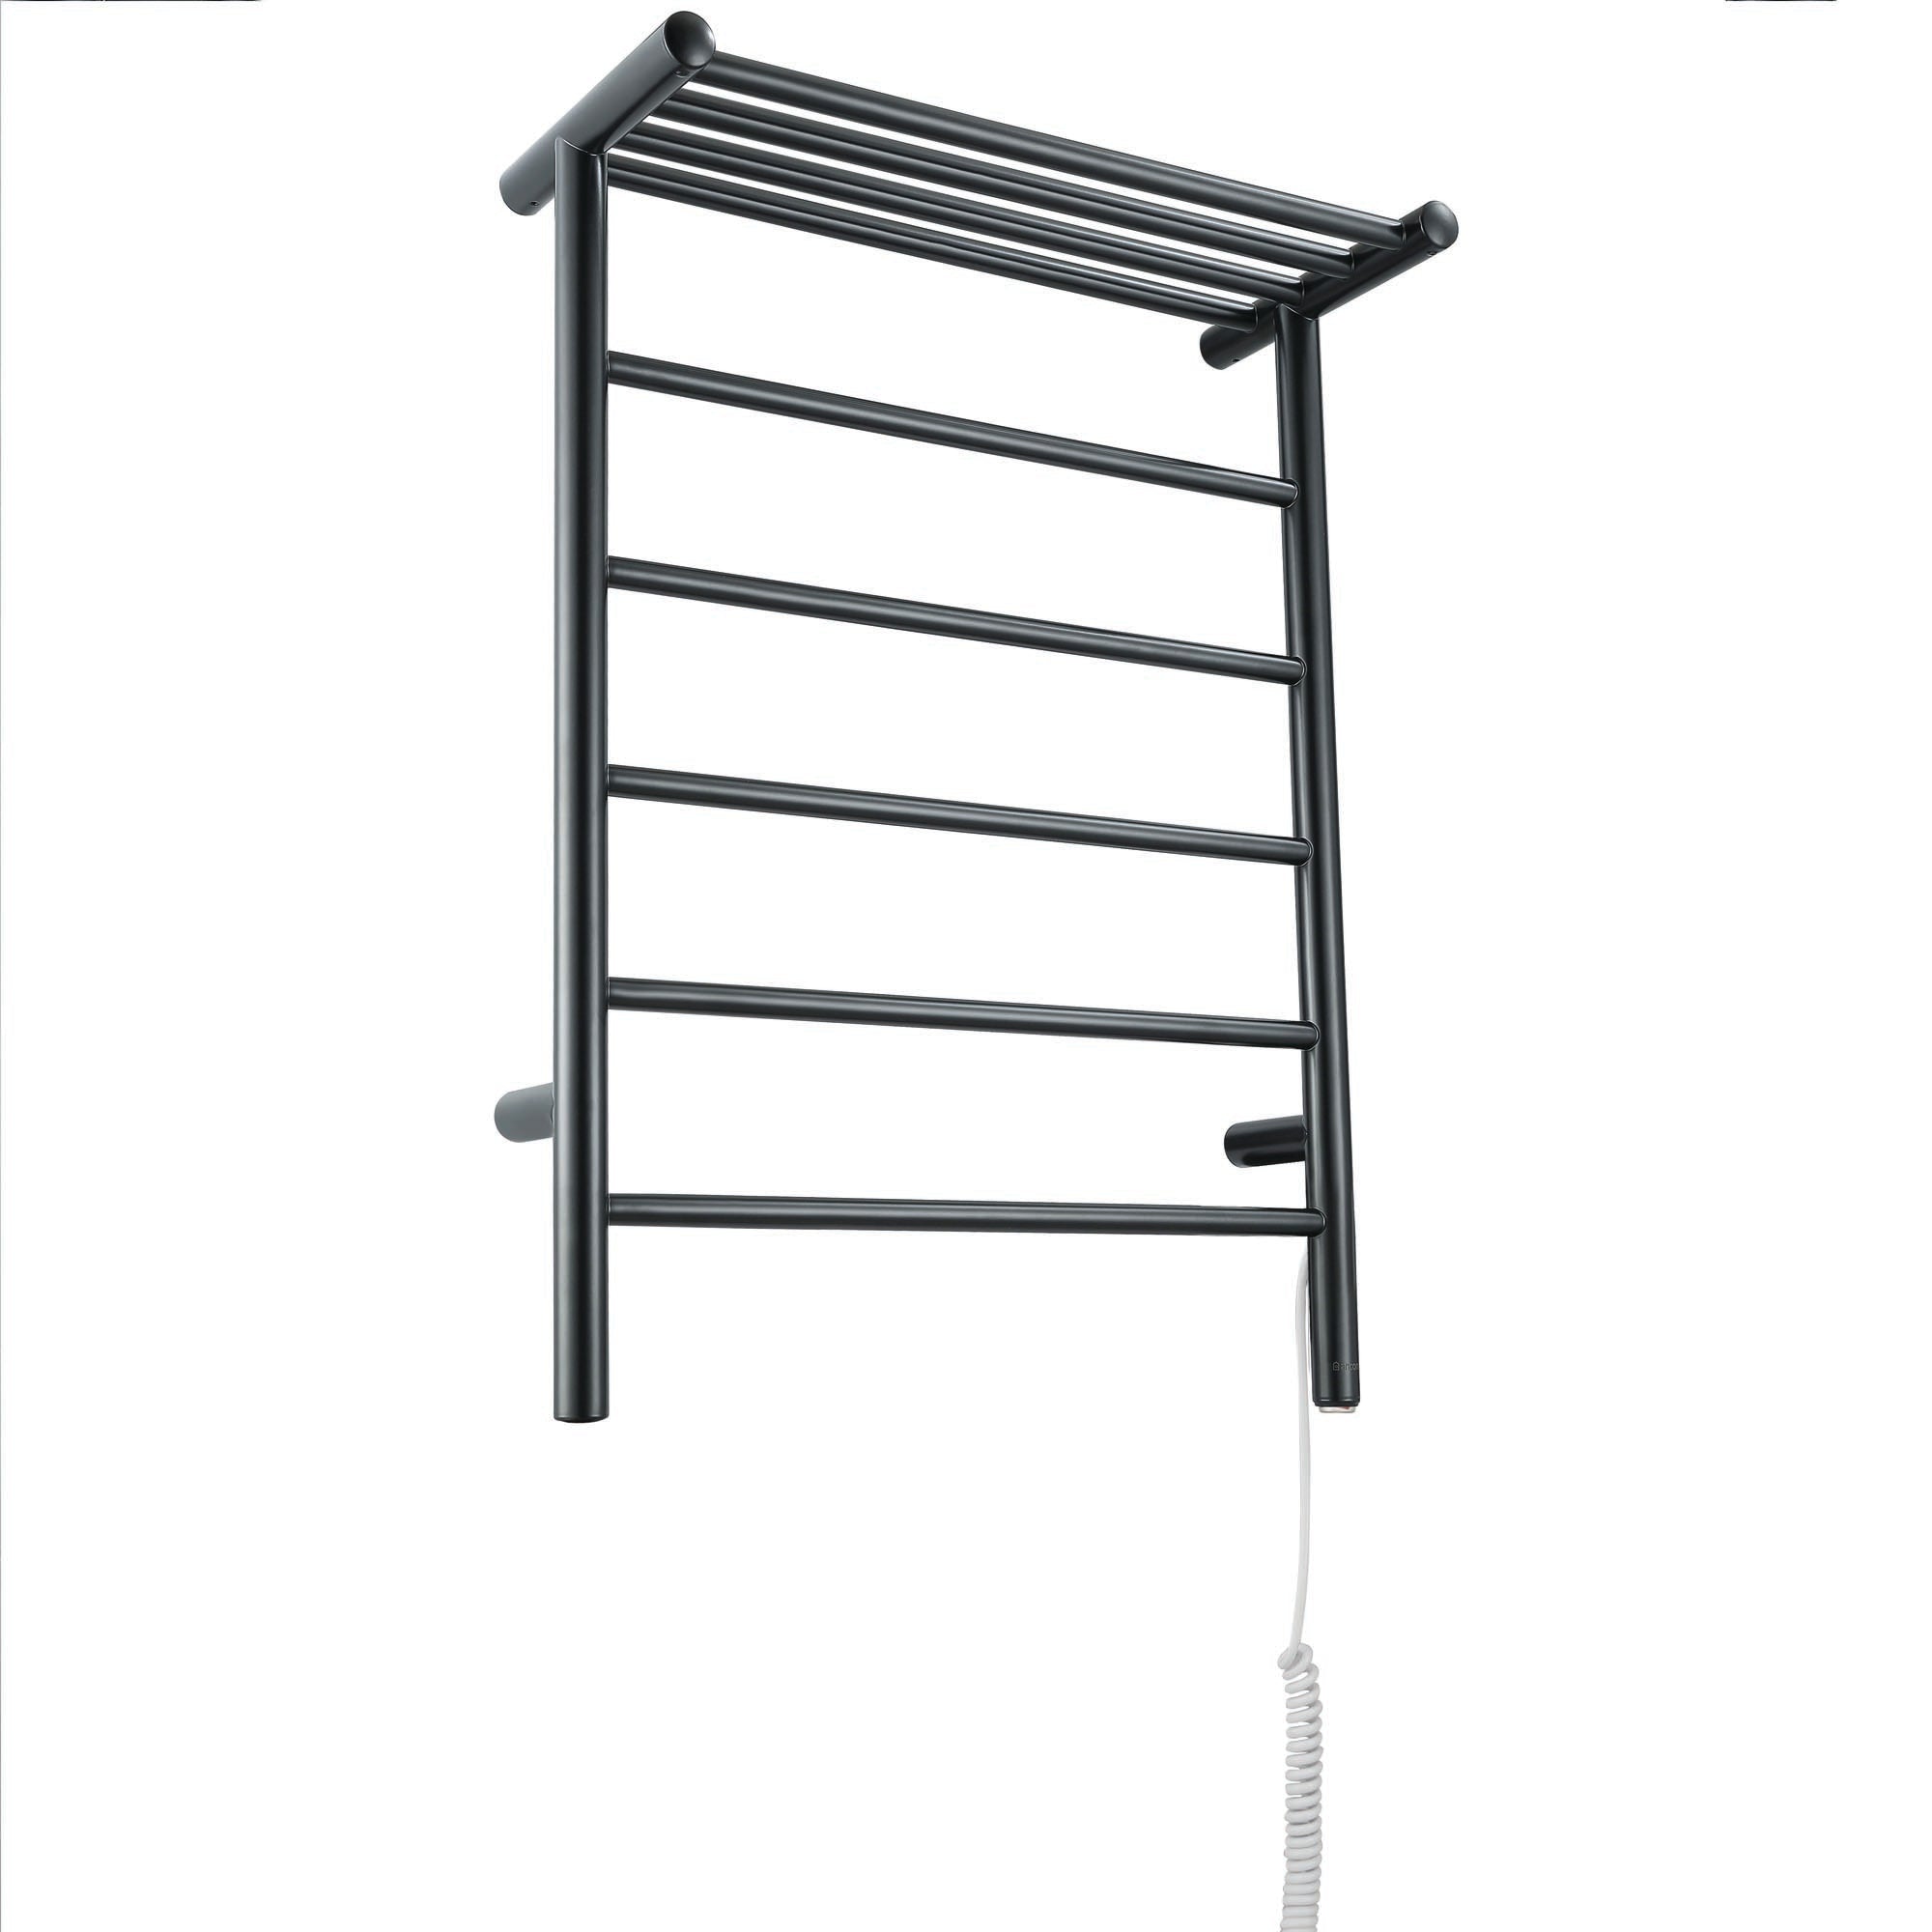 Miazzo 5-Bar Electric Wall Mount Plug-In and Hardwire Towel Warmer with Shelf in Matte Black